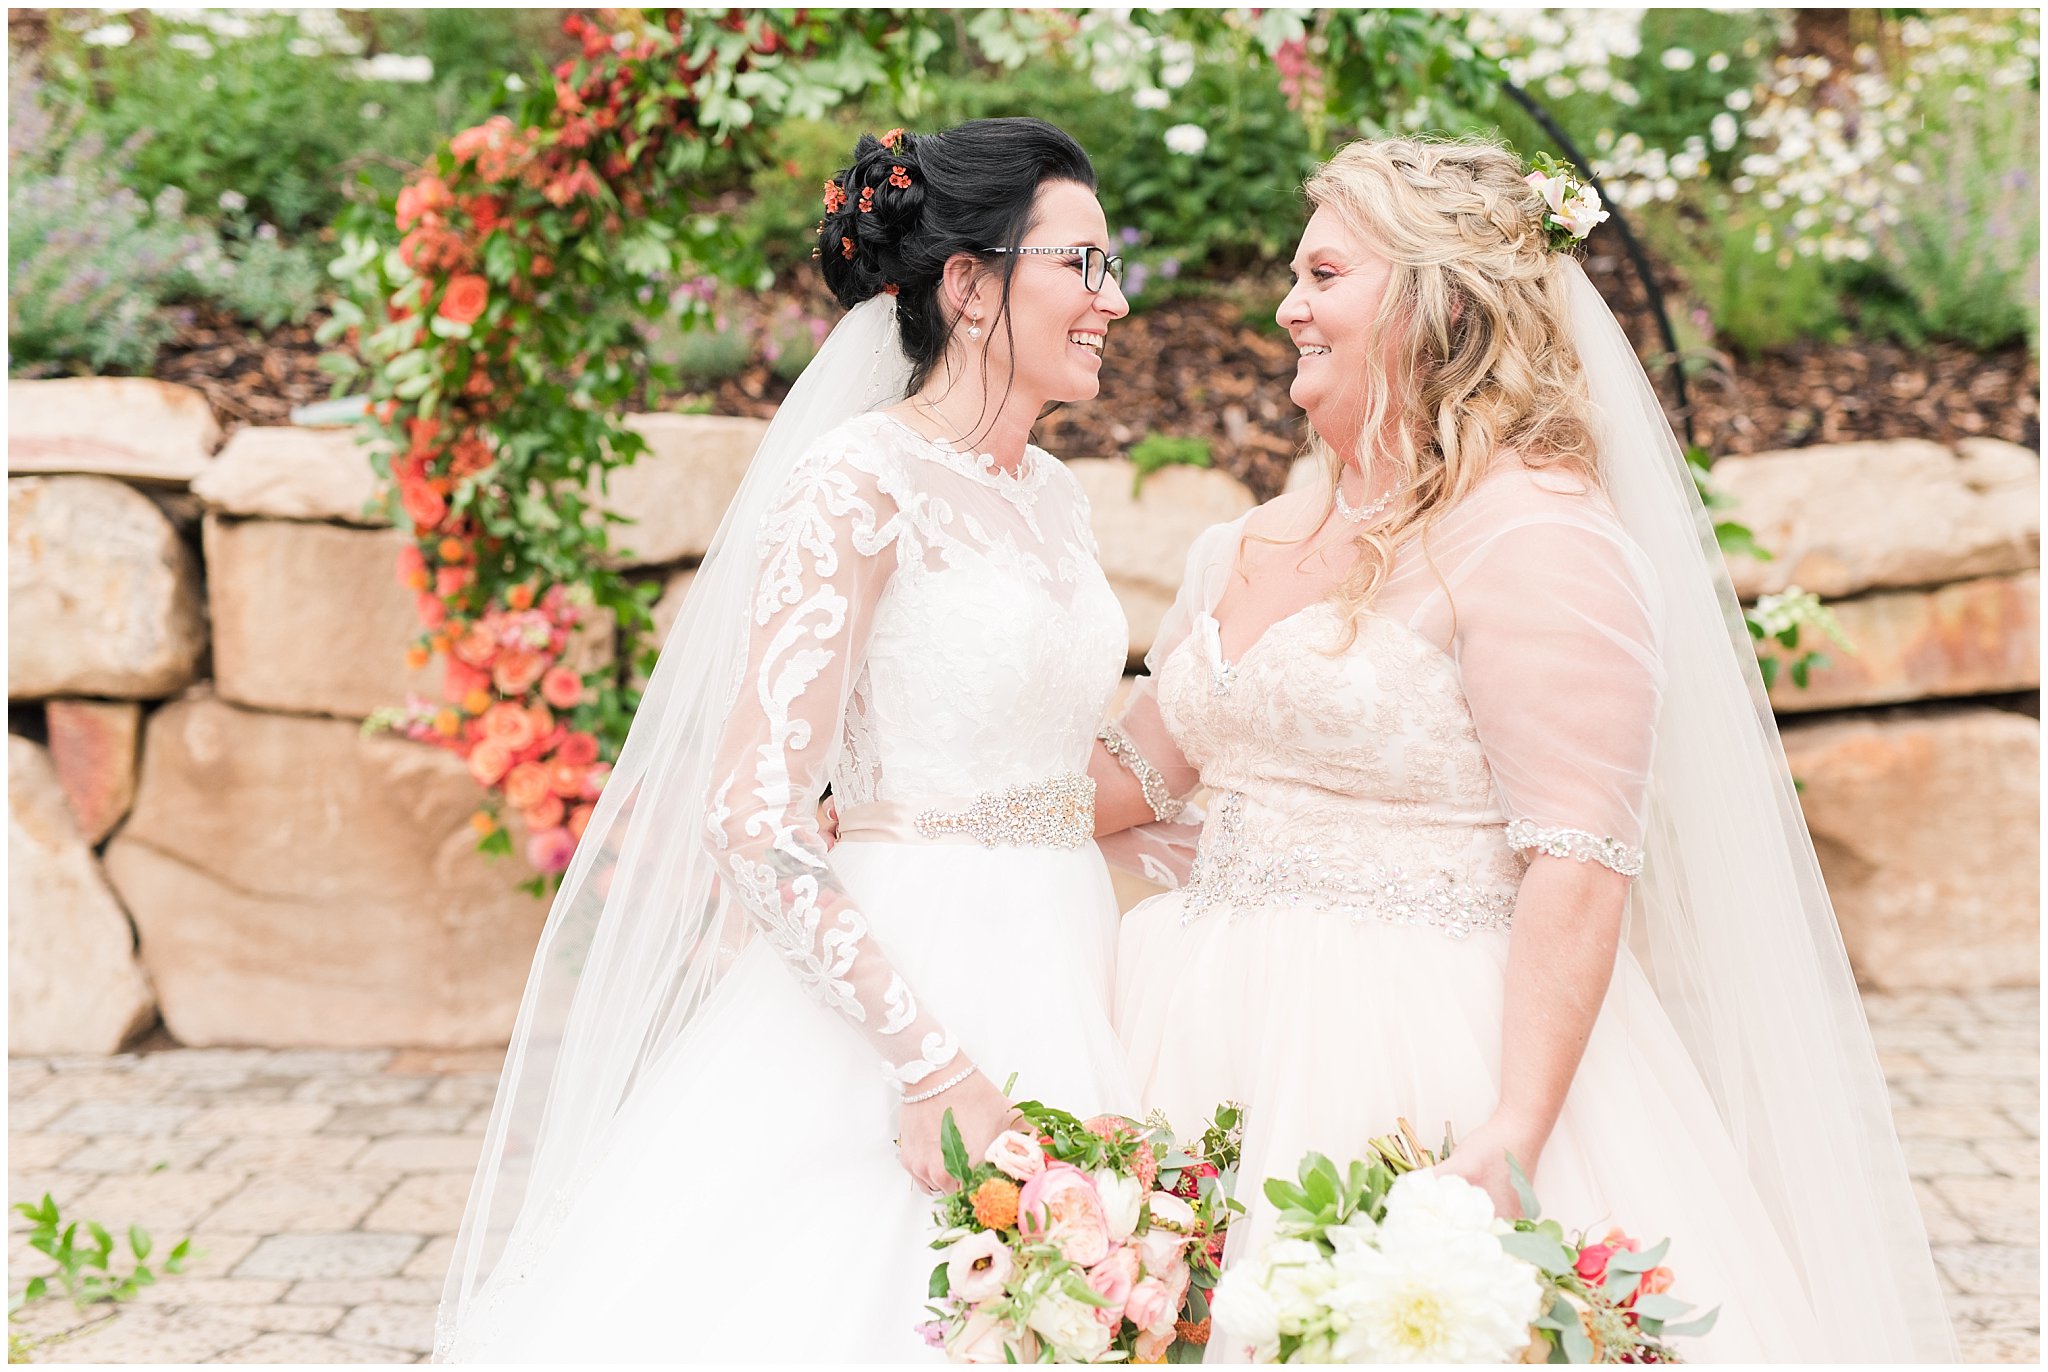 Brides in front of alter at Park City Utah wedding | Top Utah Wedding and Couples Photos 2019 | Jessie and Dallin Photography